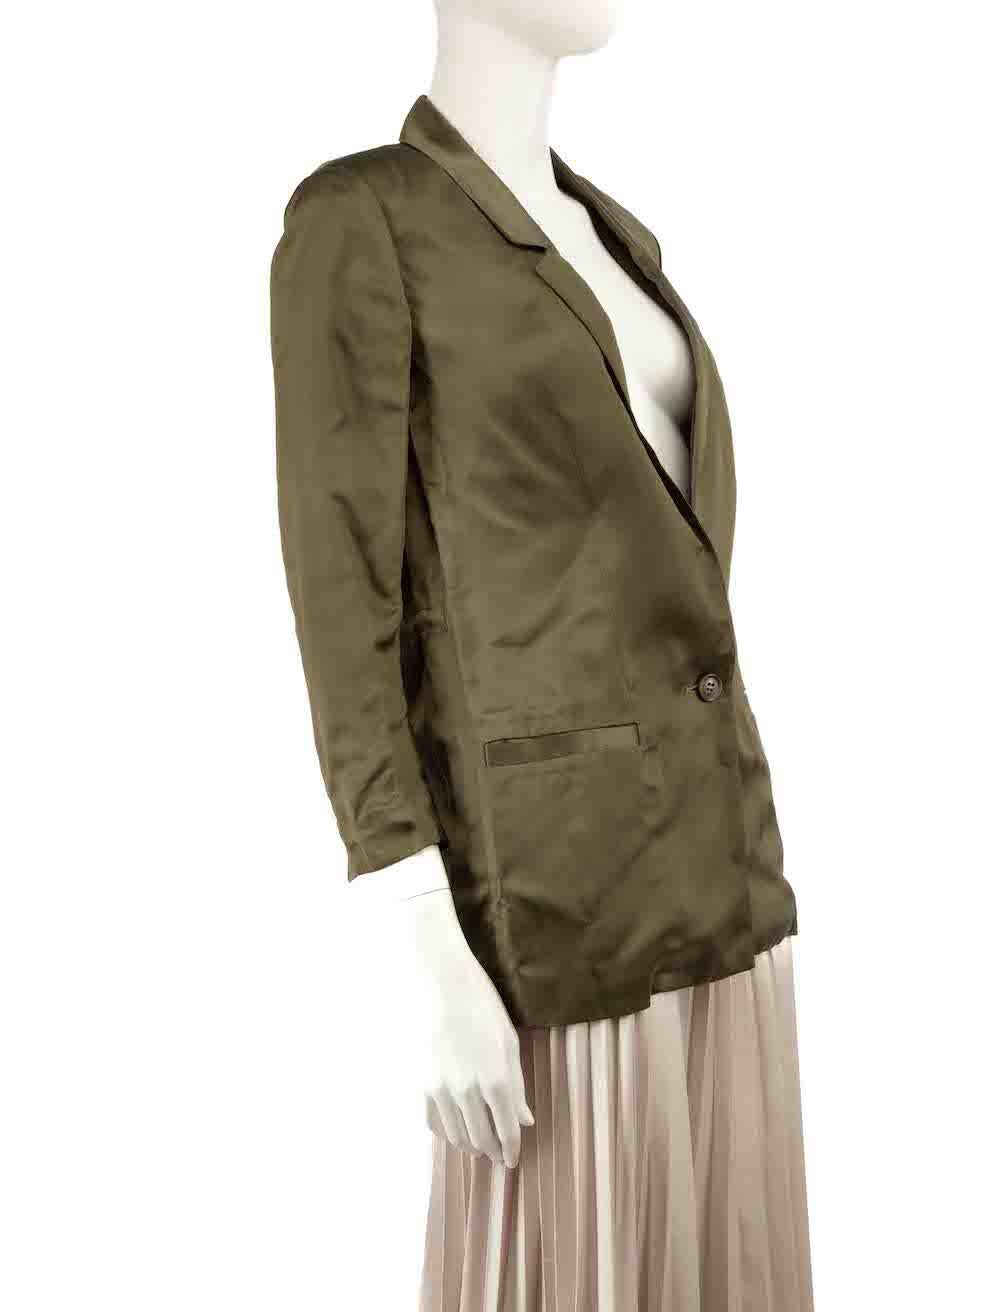 CONDITION is Very good. Minimal wear to jacket is evident. Minimal wear to the fabric surface with a couple of pulls to the weave found at the cuffs on this used Diane Von Furstenberg designer resale item.
 
 Details
 Khaki
 Cupro
 Blazer
 Button